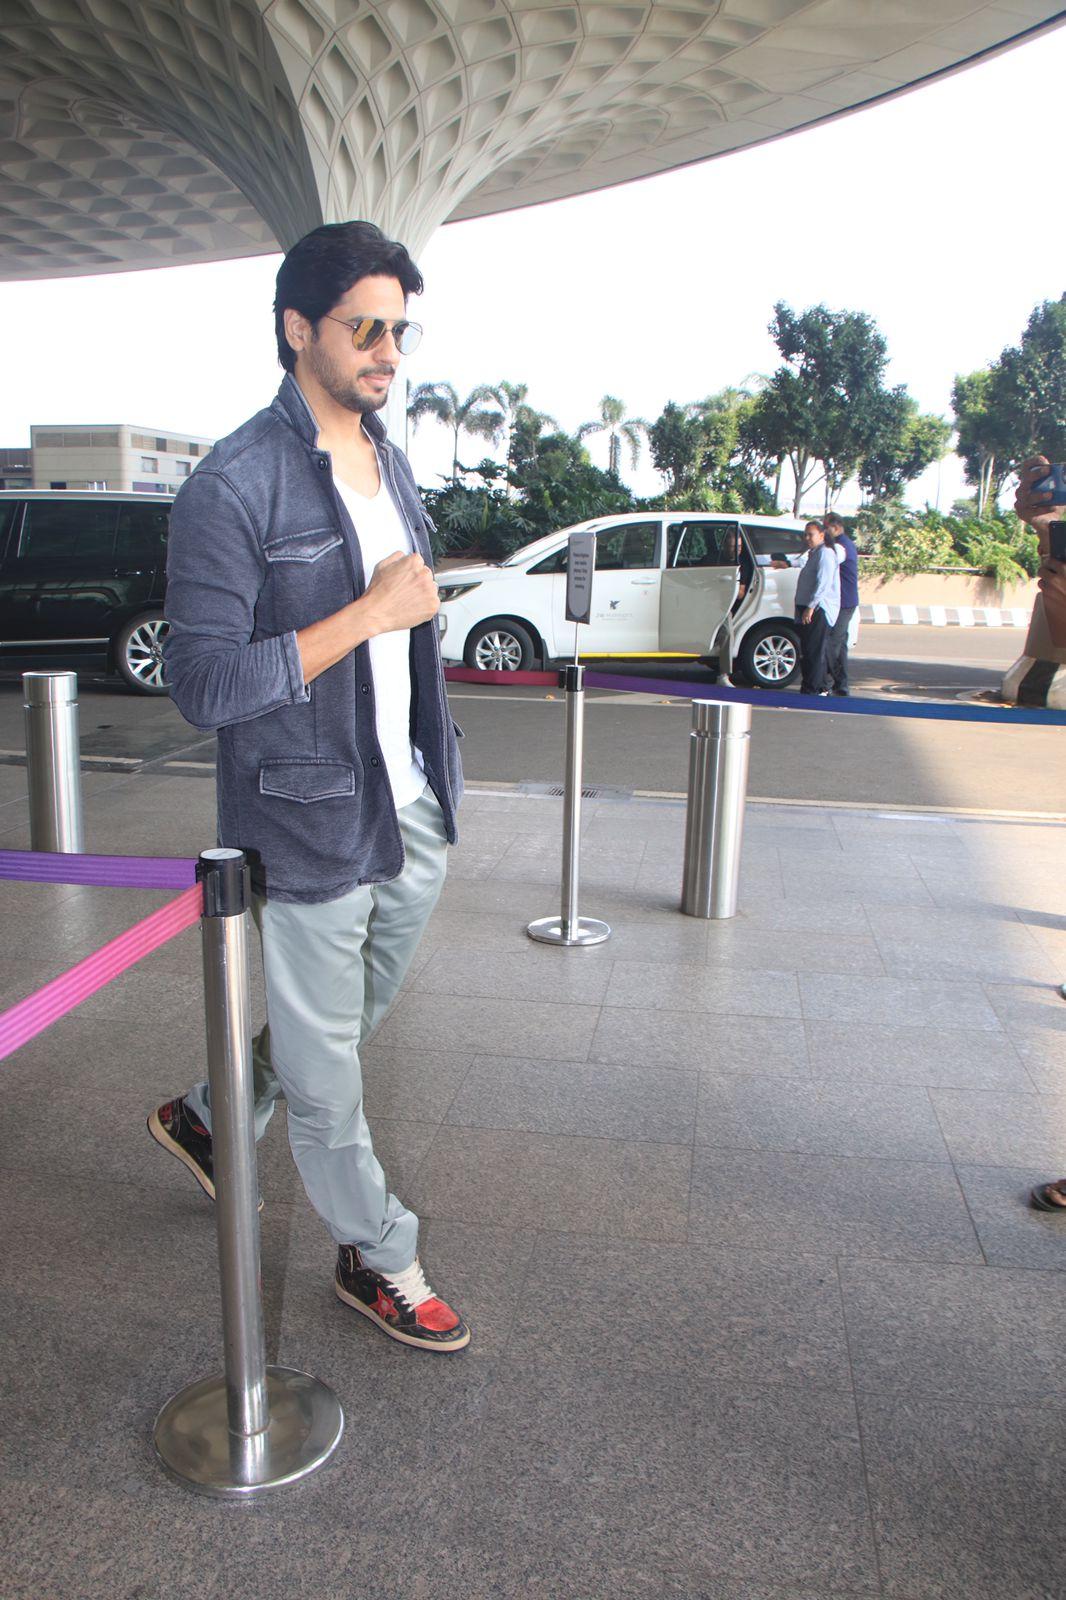 Sidharth Malhotra the Bollywood heartthrob was seen at the airport today